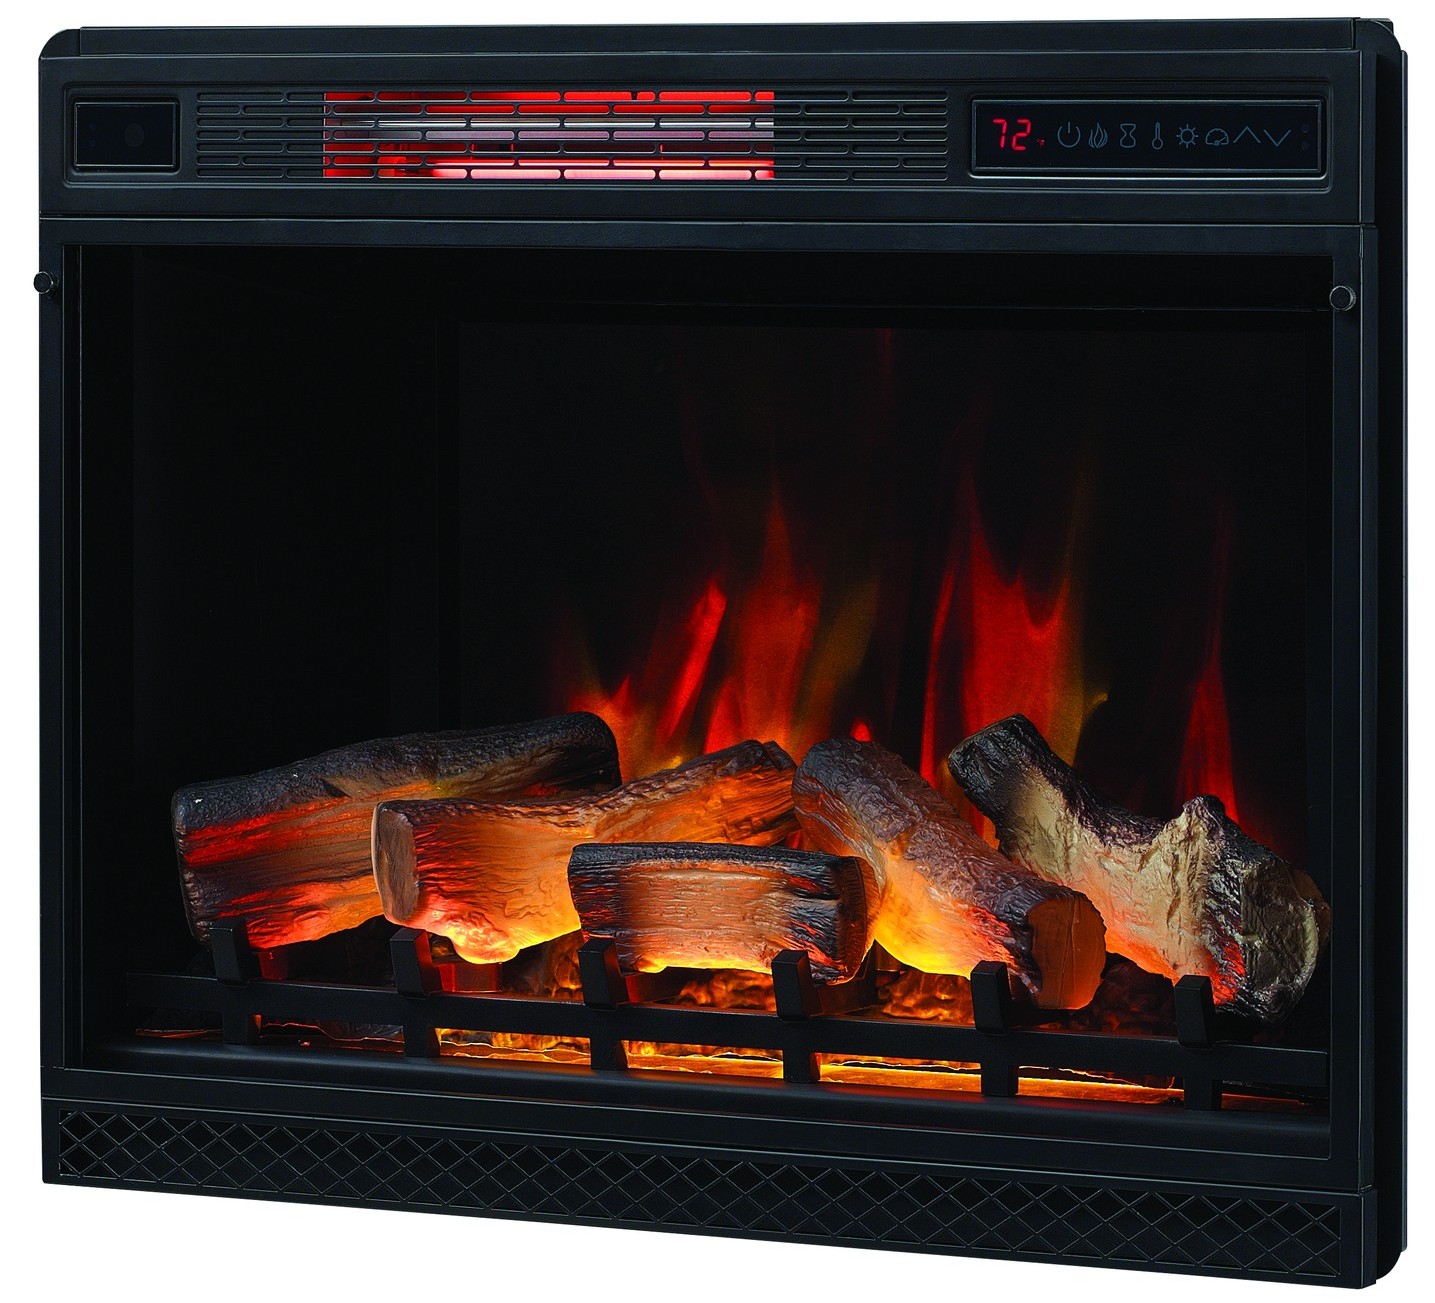 How to Start Electric Fireplace Inspirational 28" Led 3d Infrared Insert Classic Flame